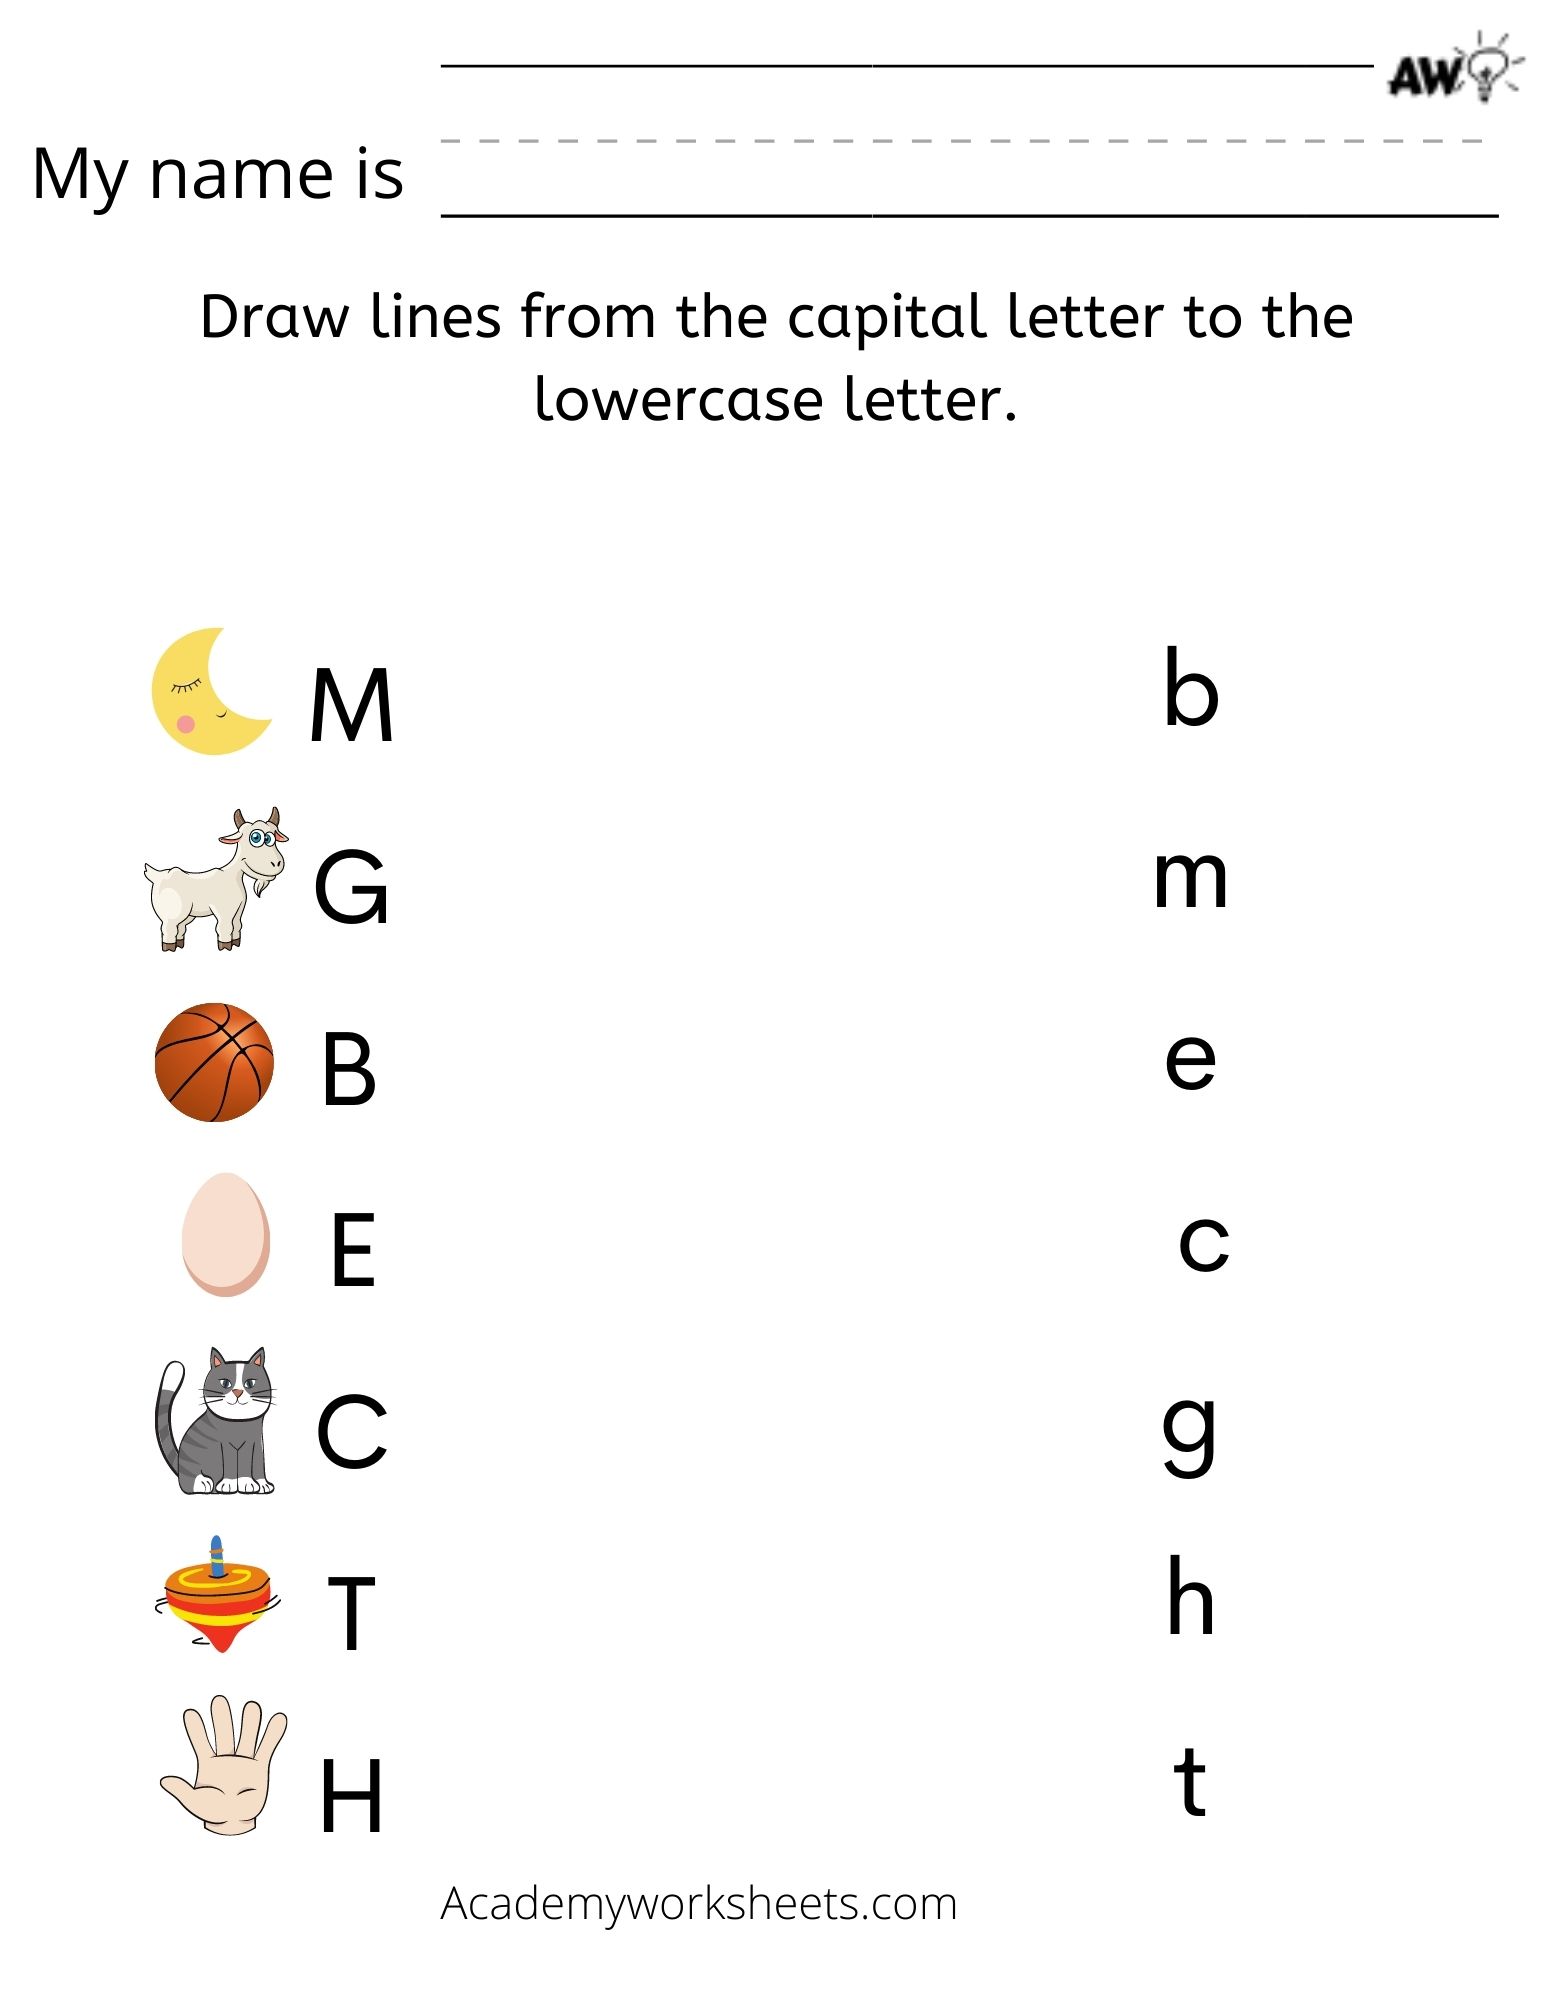 match-uppercase-and-lowercase-letters-academy-worksheets